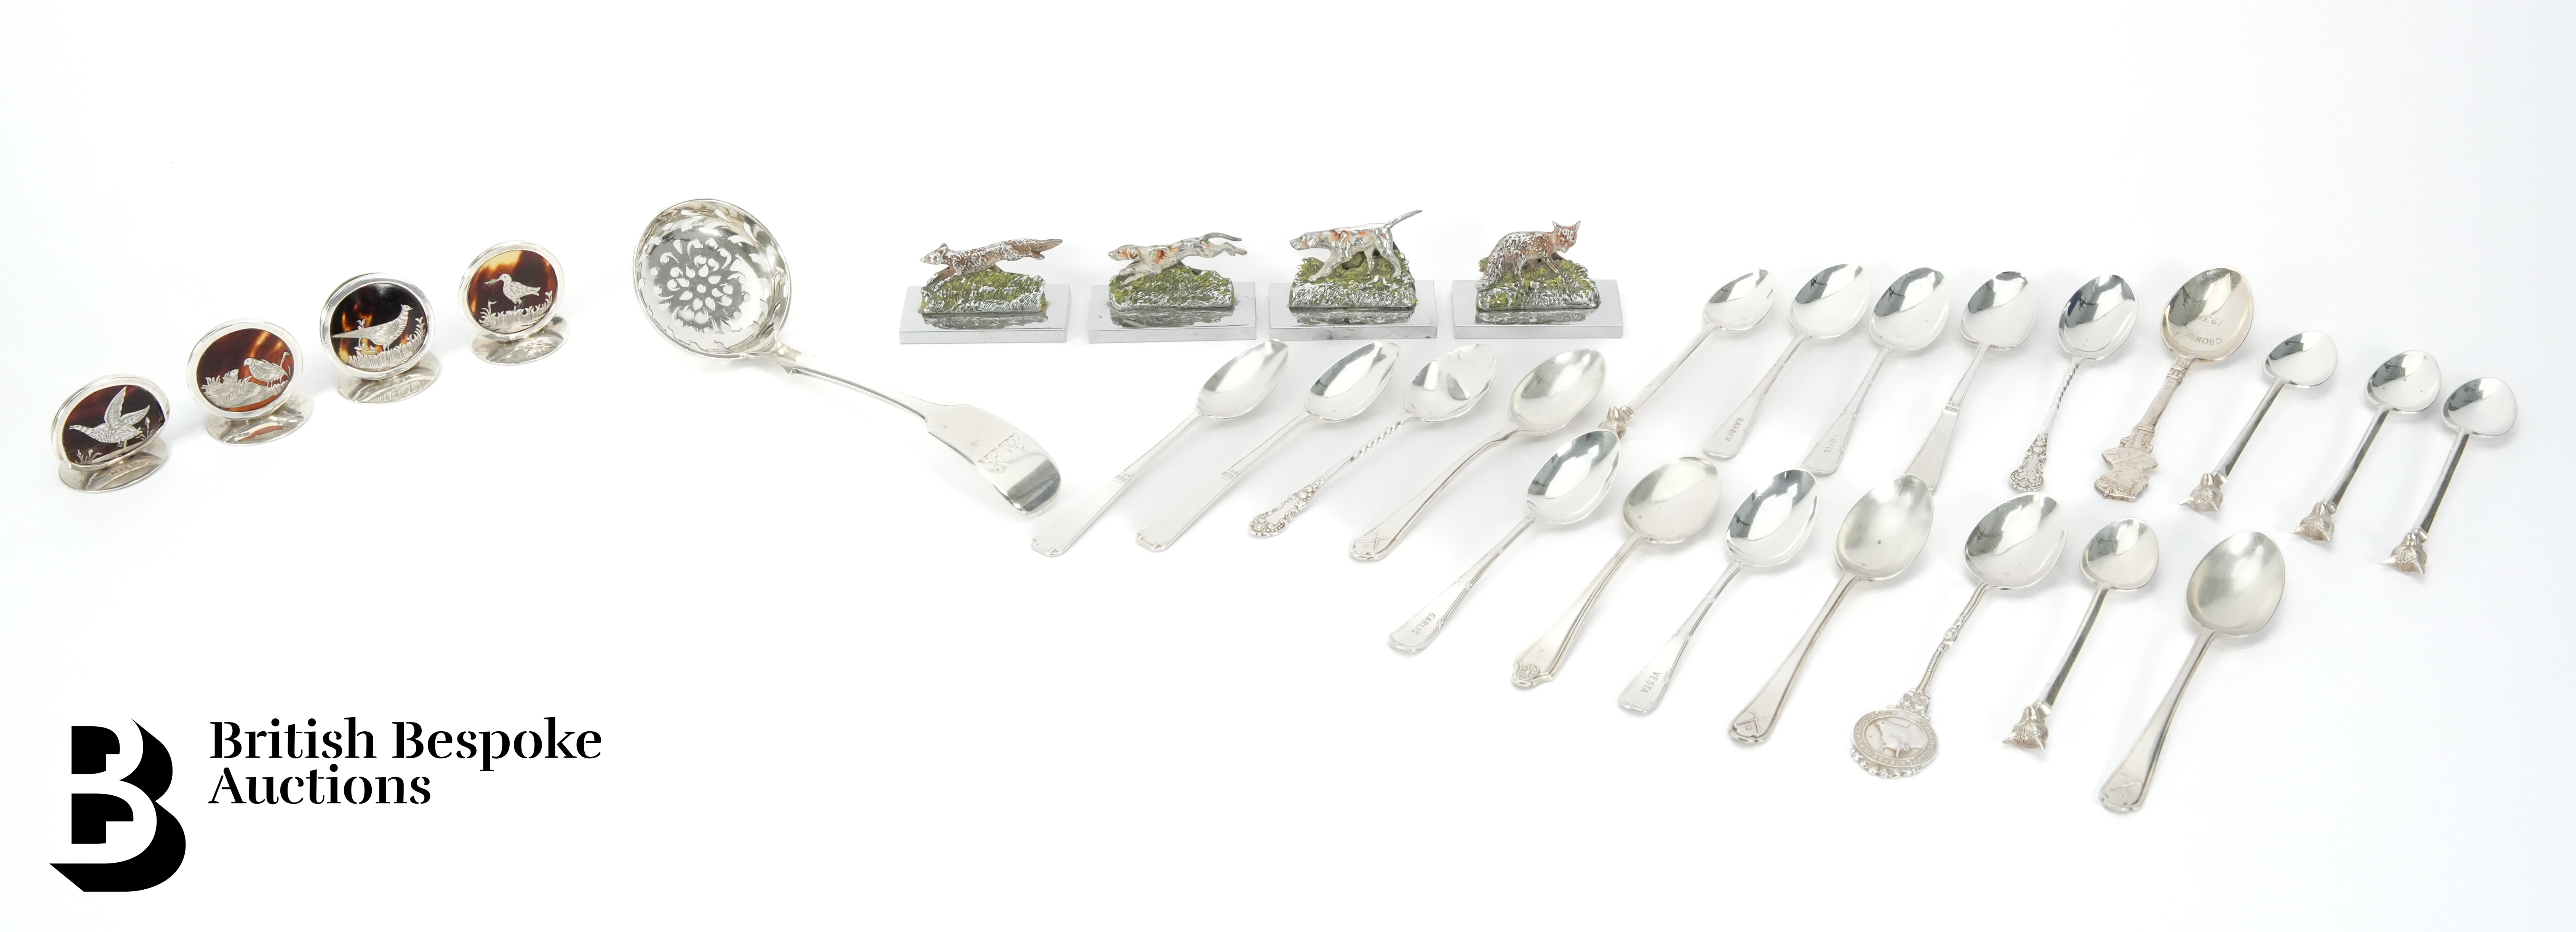 Quantity of Sterling Silver Spoons and Place Settings